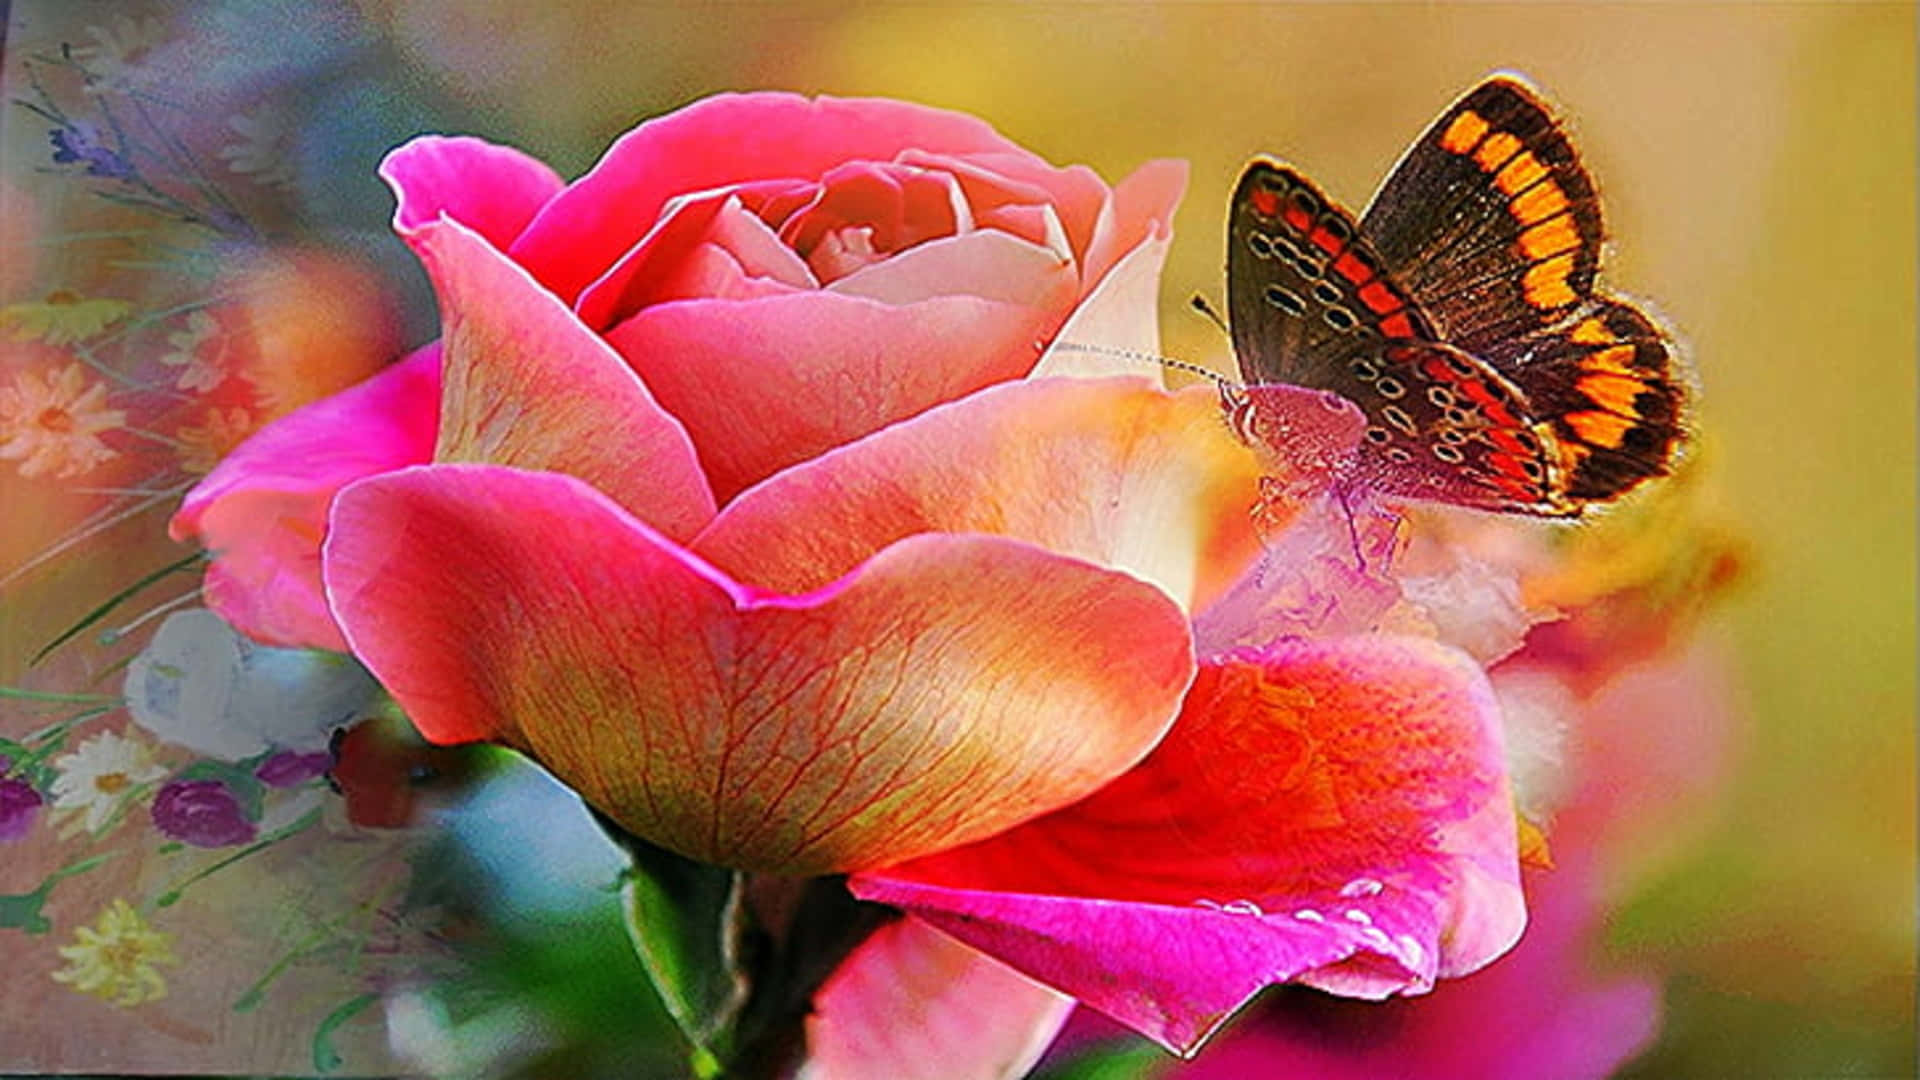 1080p Beautiful Roses With A Butterfly Background